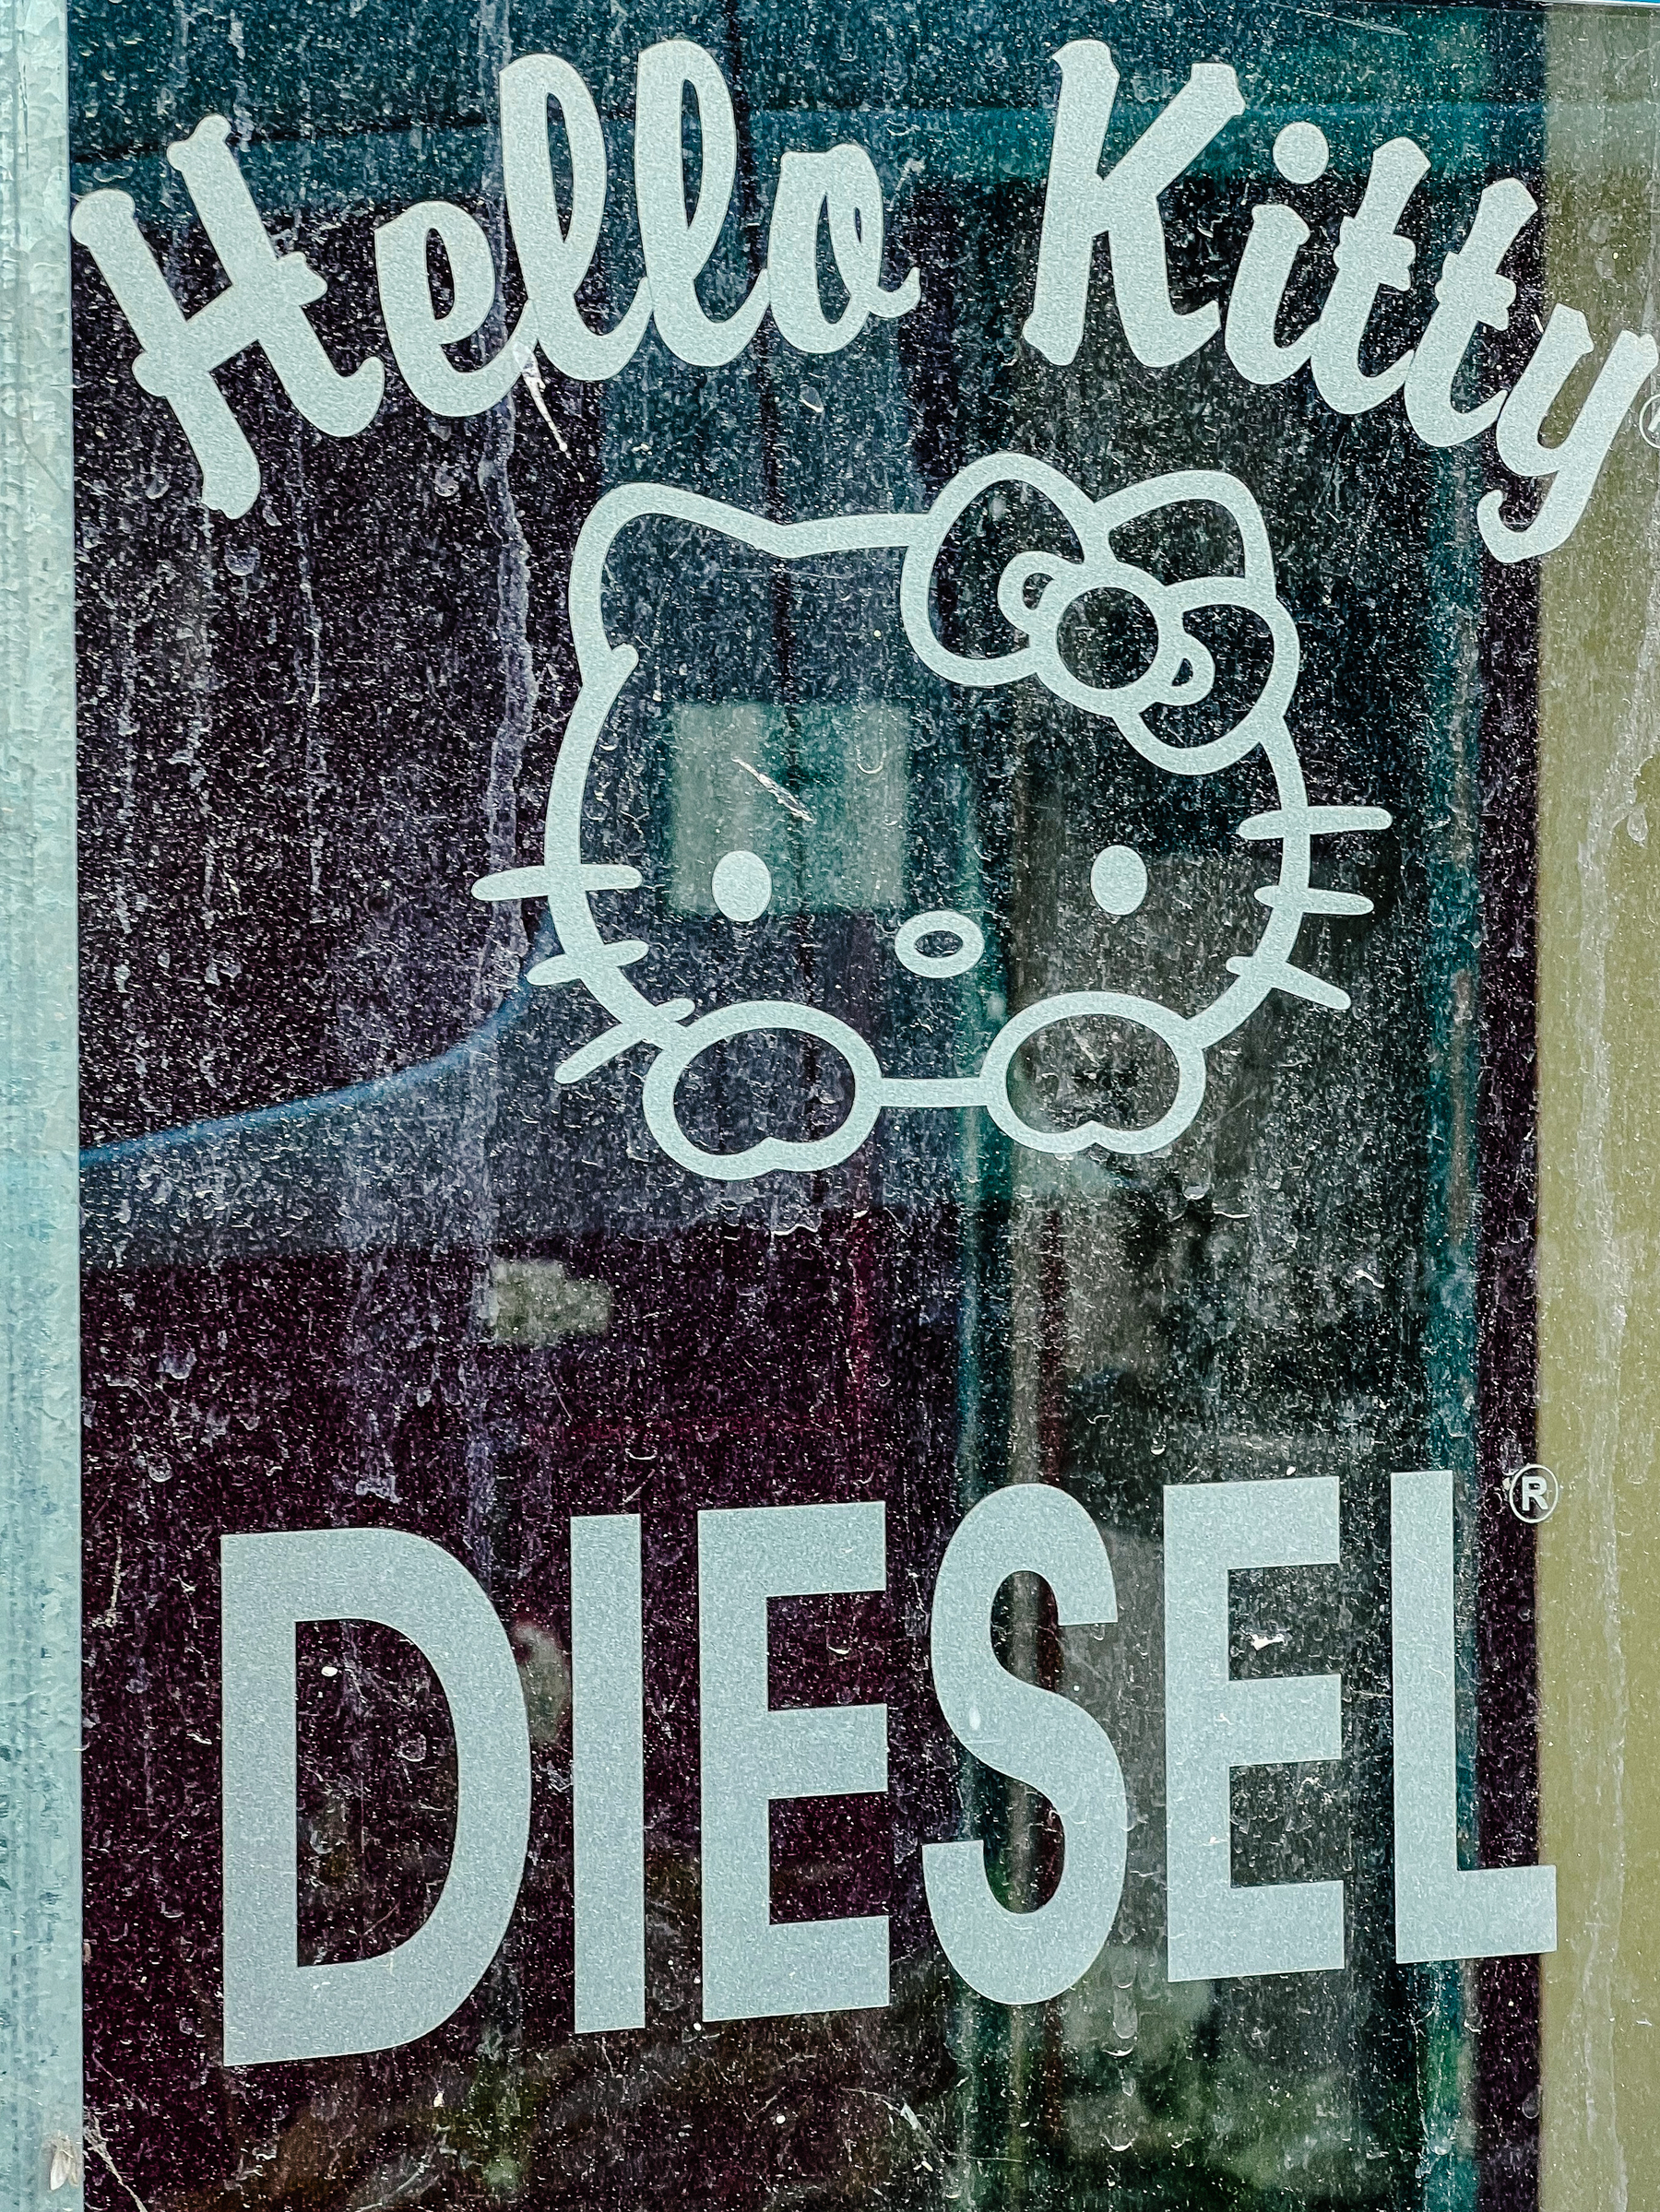 A very dirty window with a sticker of Hello Kitty, her name on top, and “DIESEL” below. 